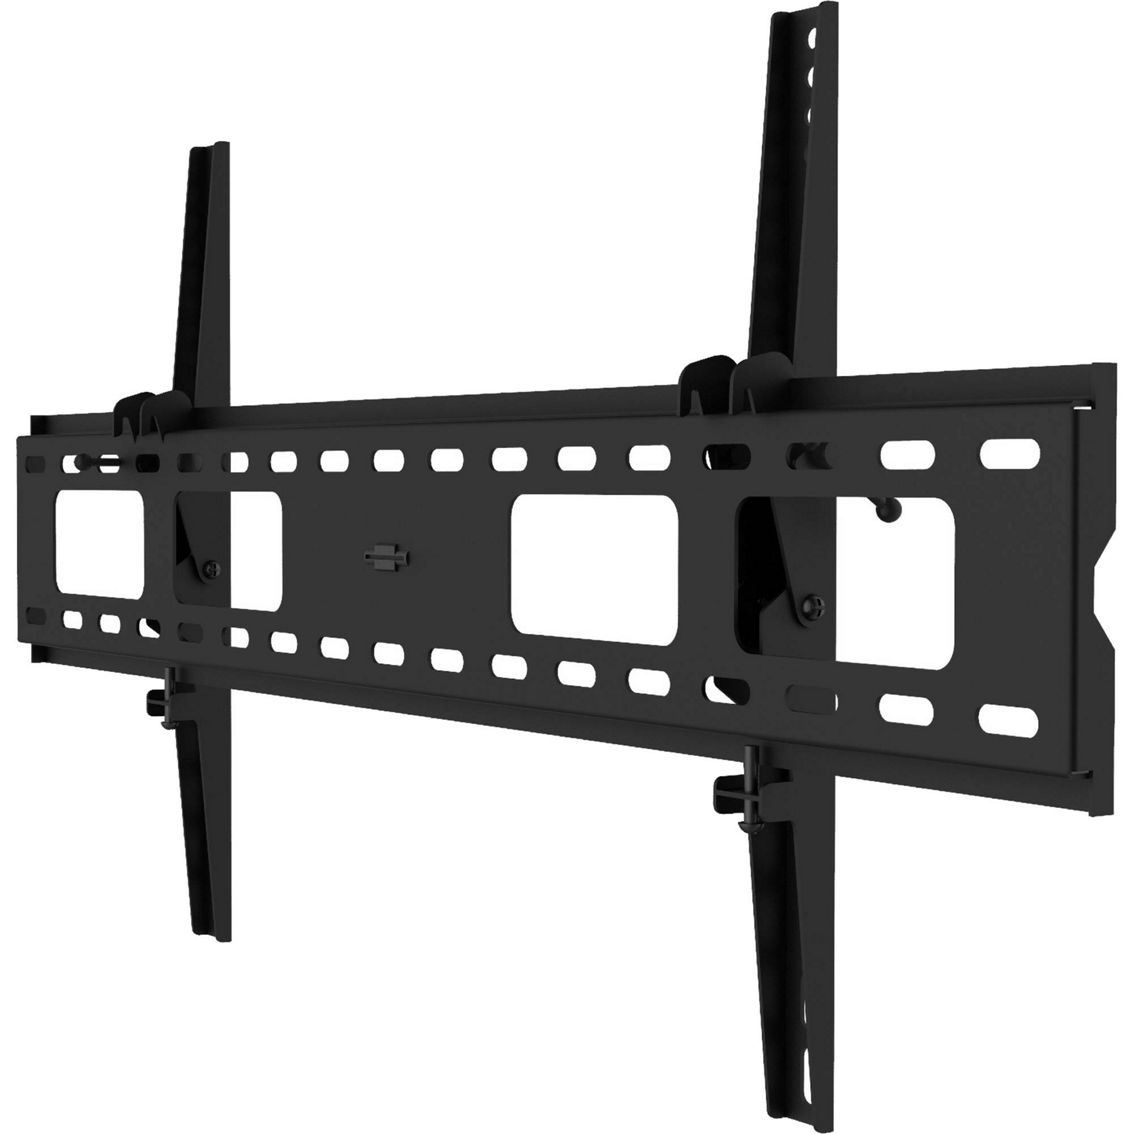 ProMounts Tilt TV Wall Mount for 50 to 90 in. TVs up to 165 lb. - Image 3 of 9